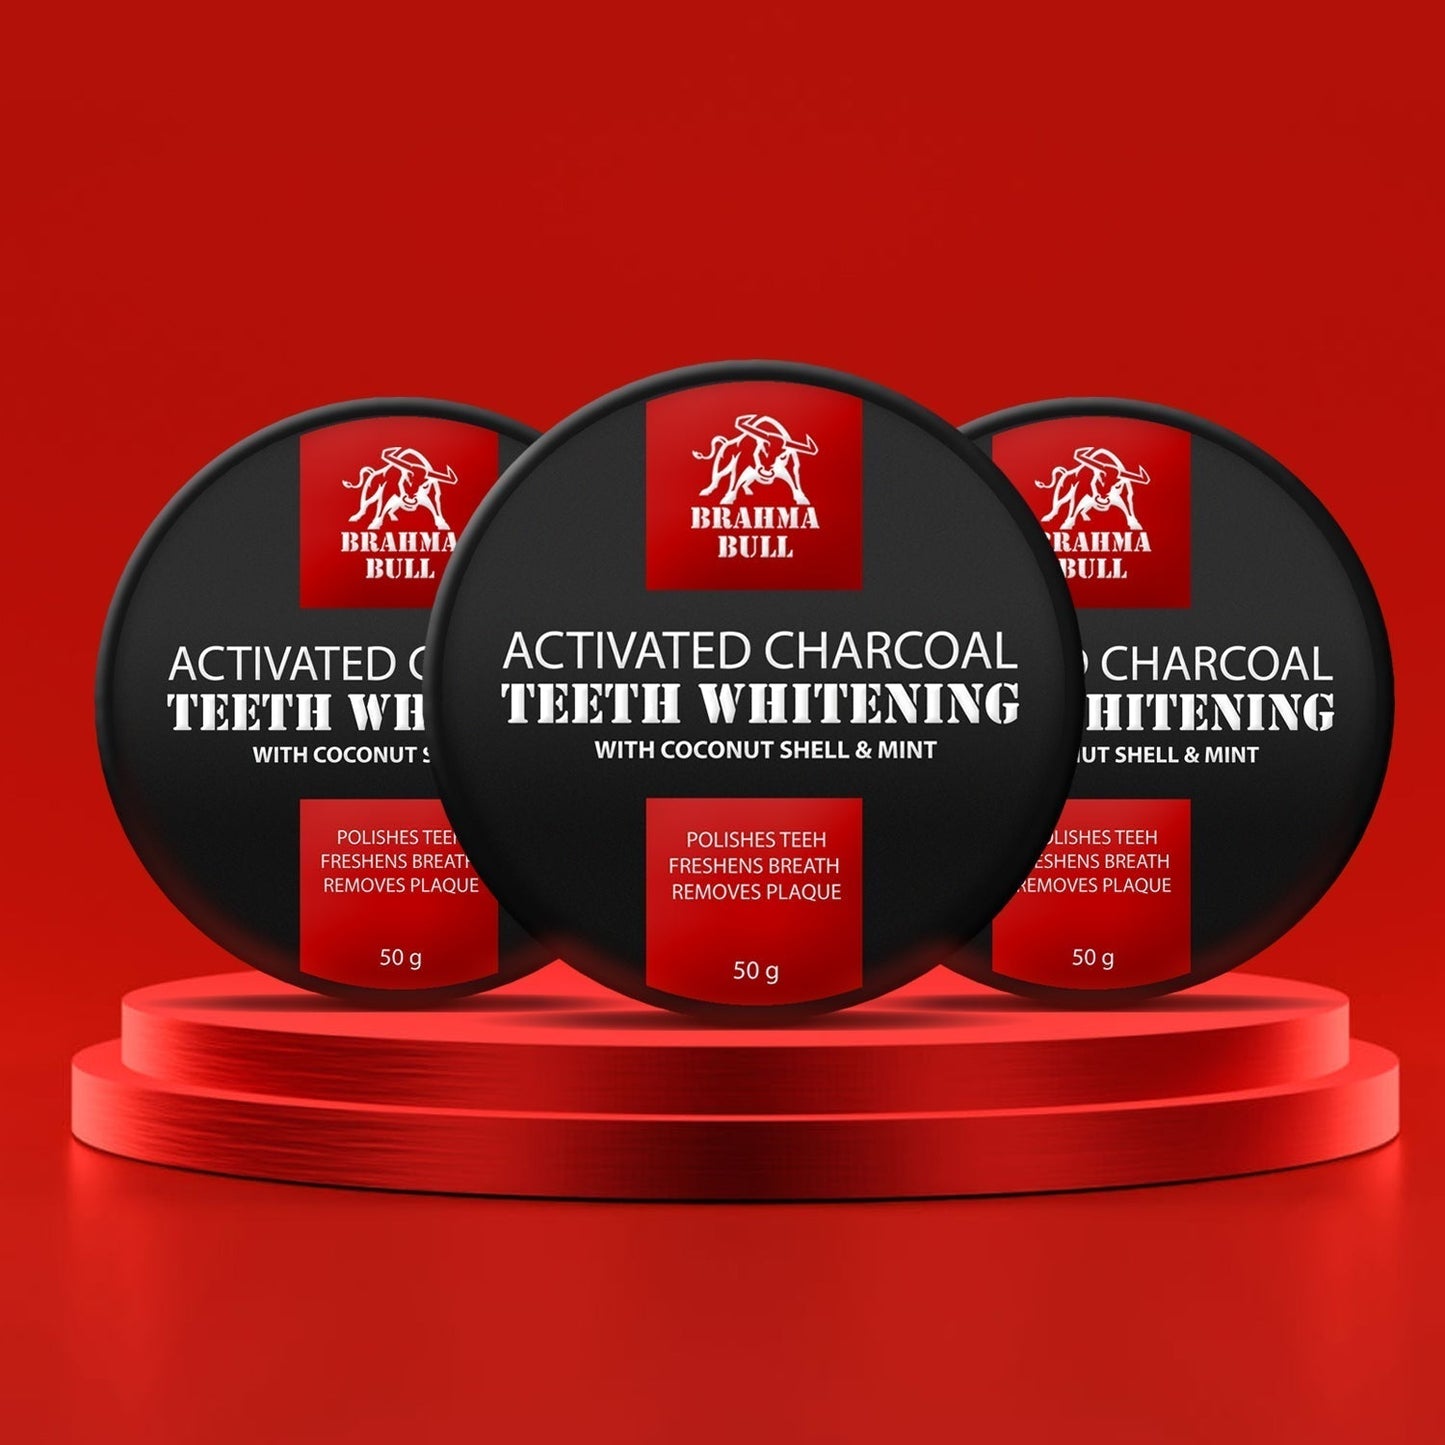 Charcoal Teeth Whitening Save Pack | Removes Plague & Whitens Teeth